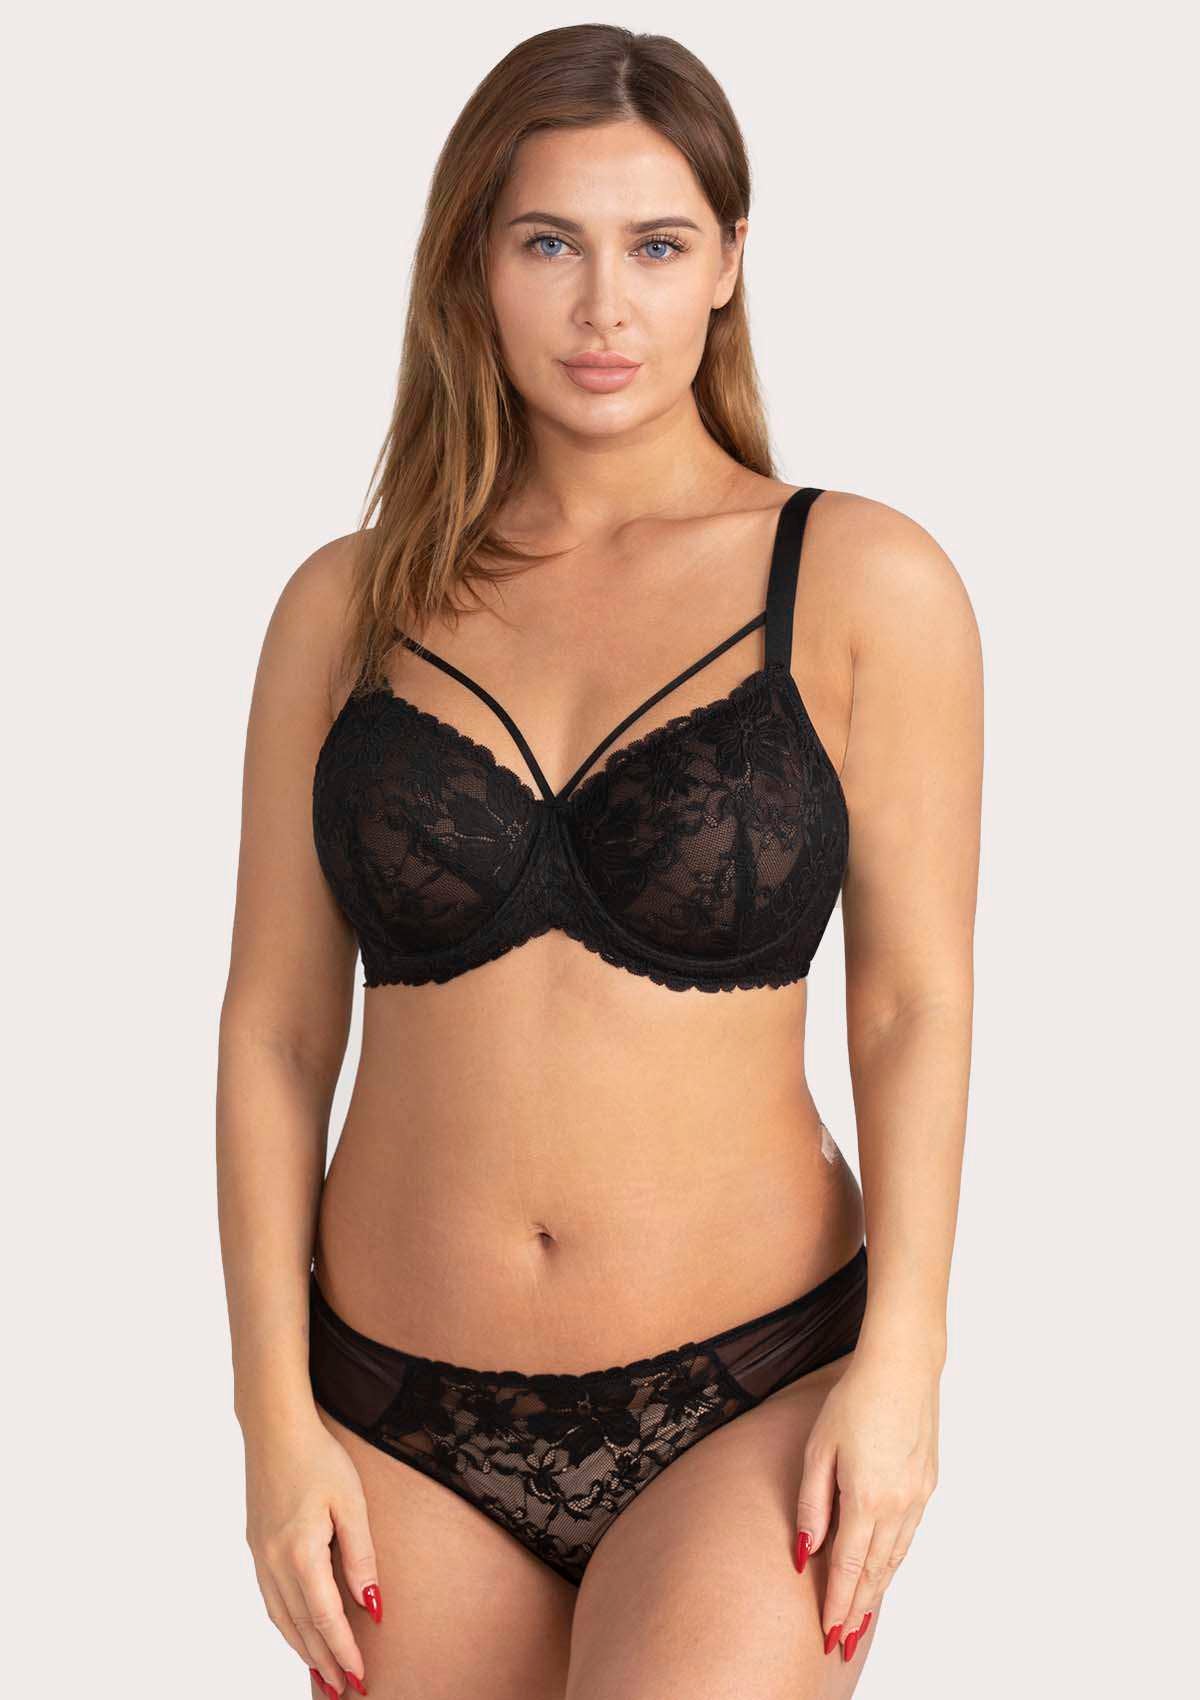 HSIA Pretty In Petals Lace Bra And Panty Set: Non Padded Wired Bra - Black / 40 / G